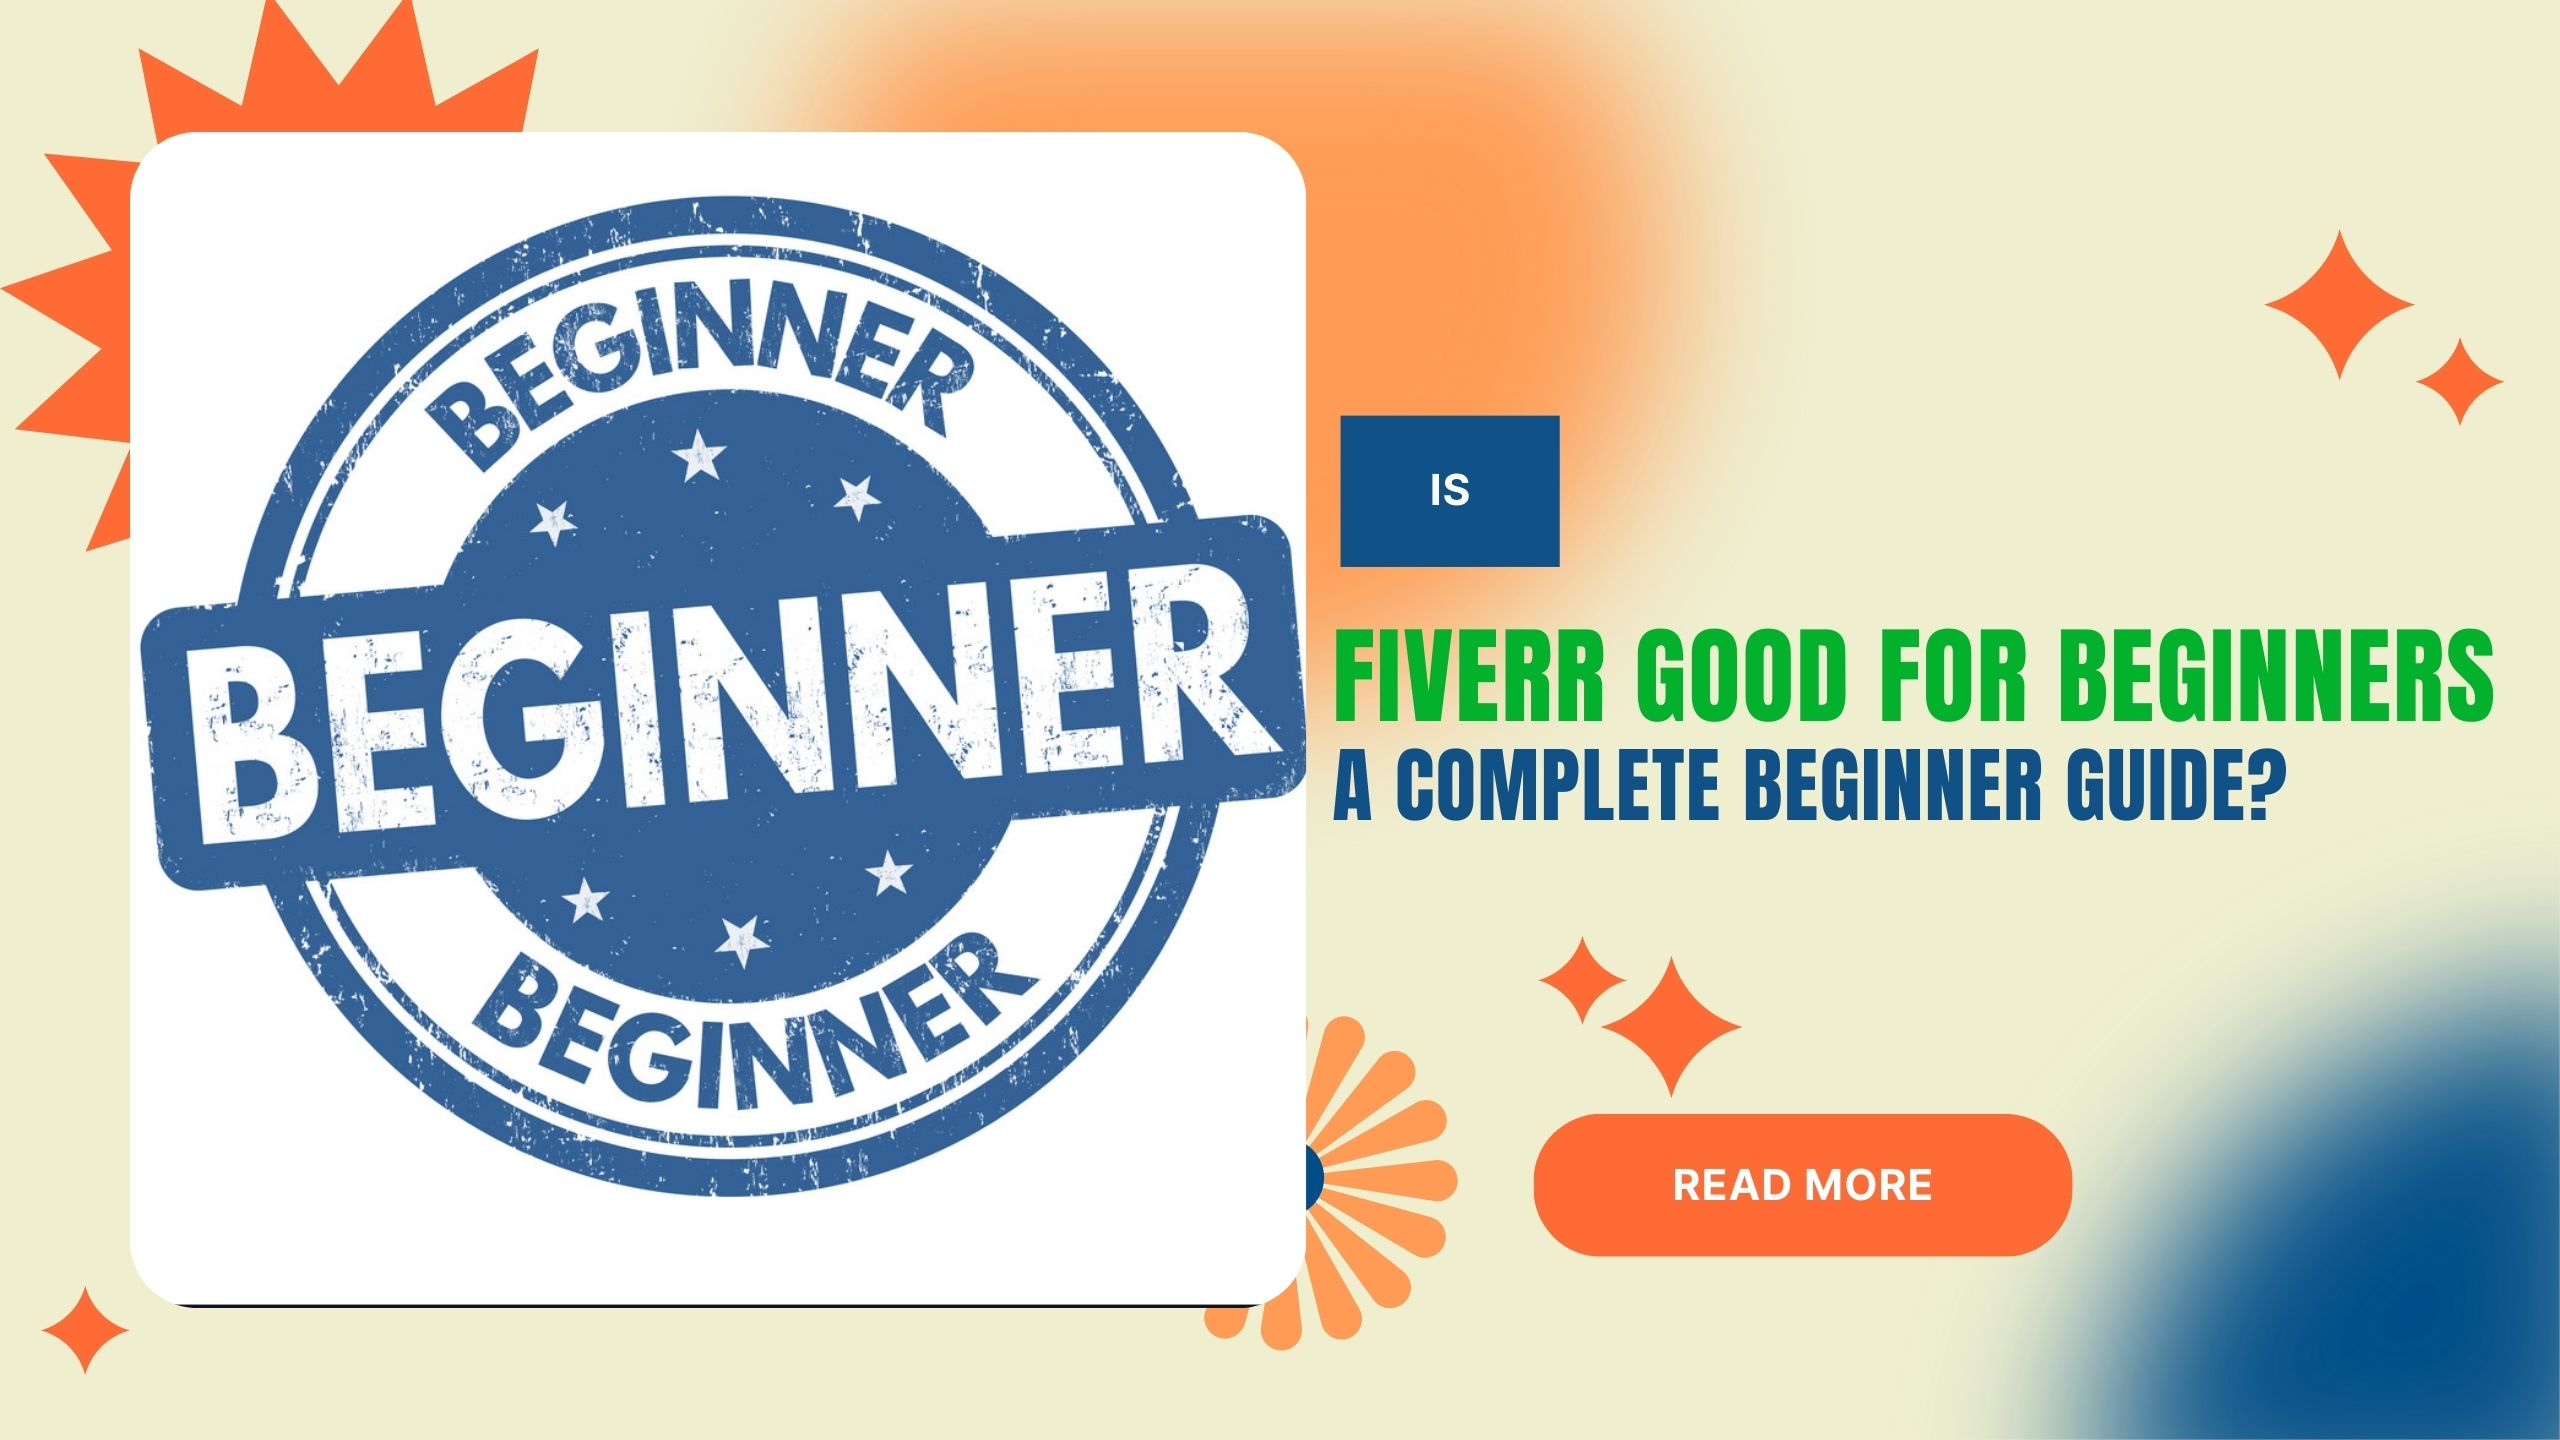 Is Fiverr Good for Beginners – A Complete Beginner Guide?